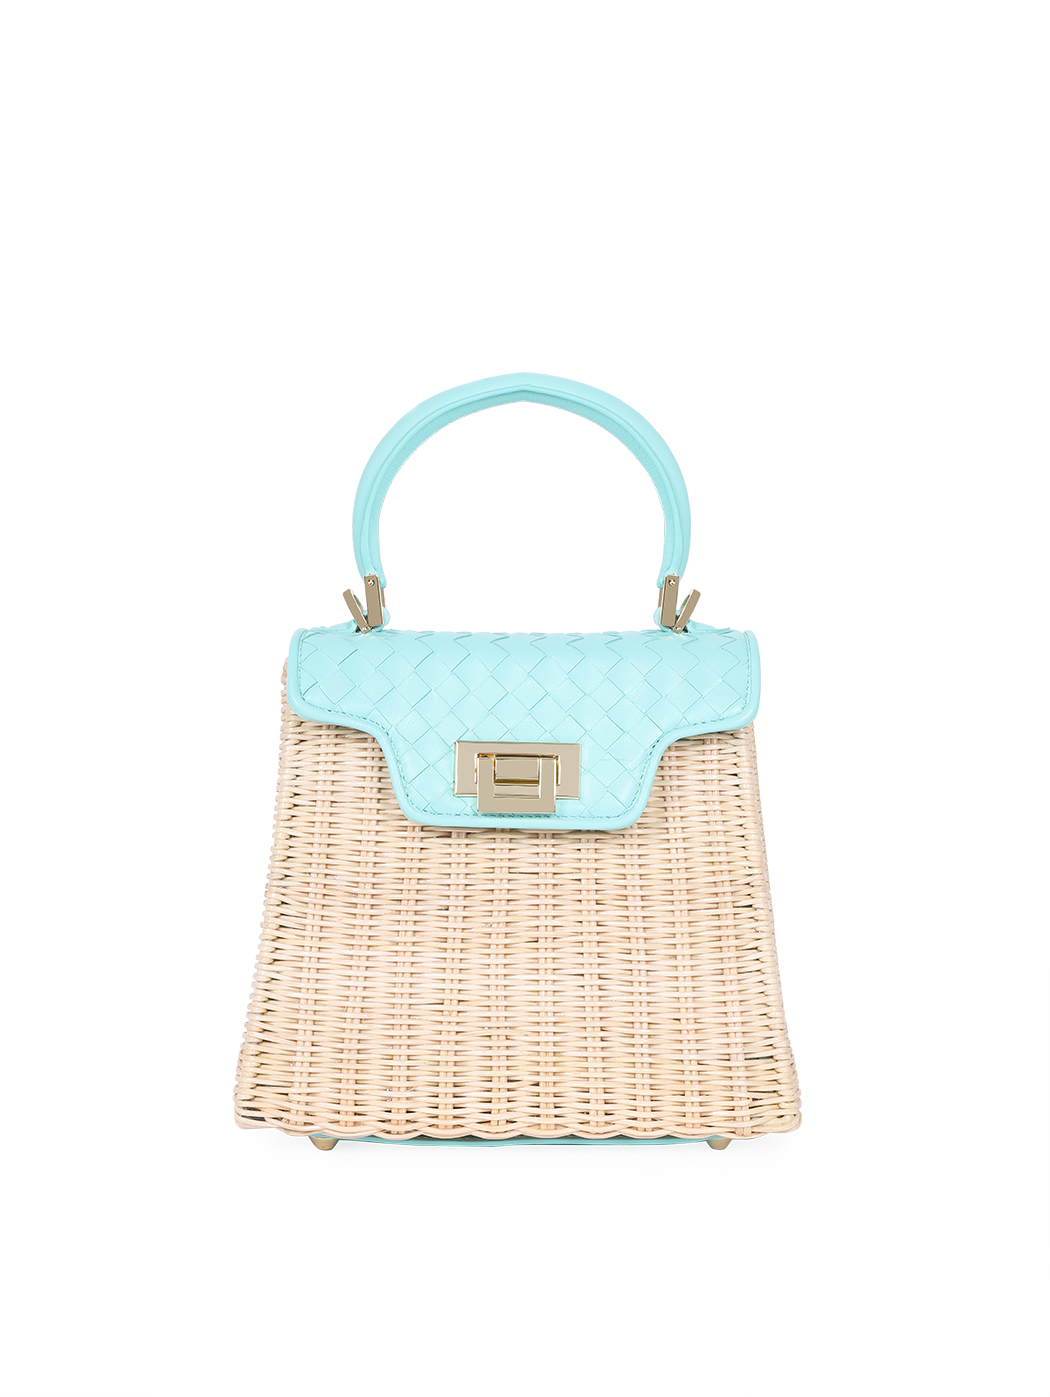 Wicker and Leather Woven Top Handle Box Bag Aqua Blue